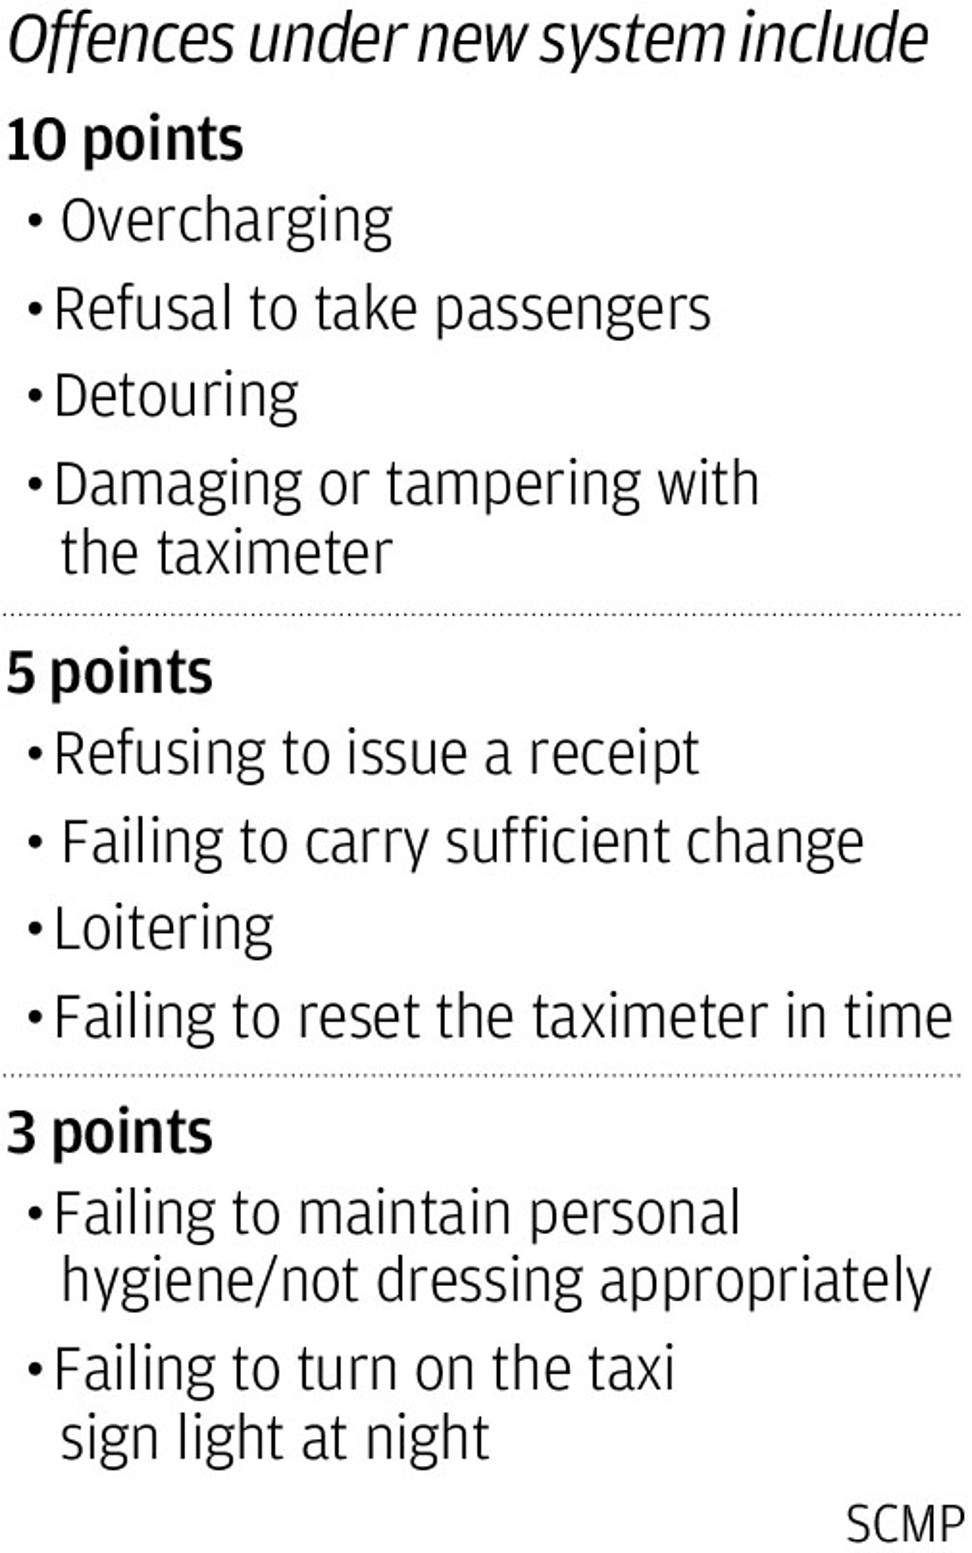 New fines for taxi drivers